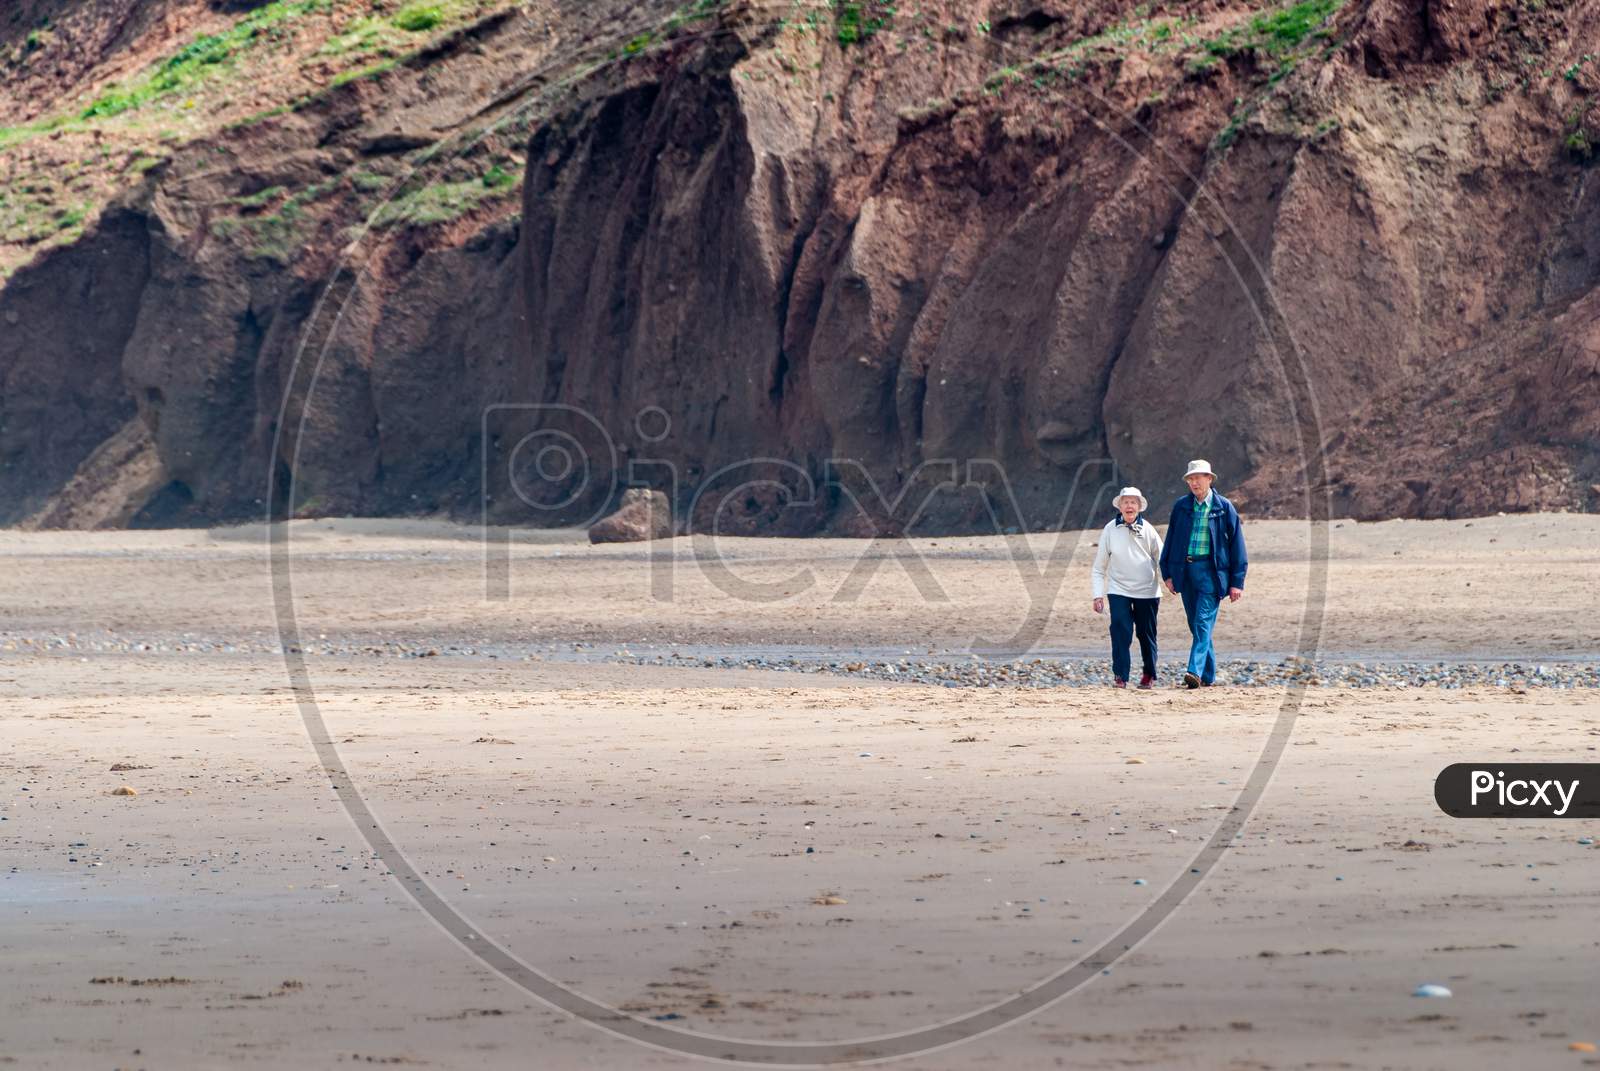 An Elderly Couple Walk Across An Empty Beach At The Base Of Tall Cliffs While Holding Hands